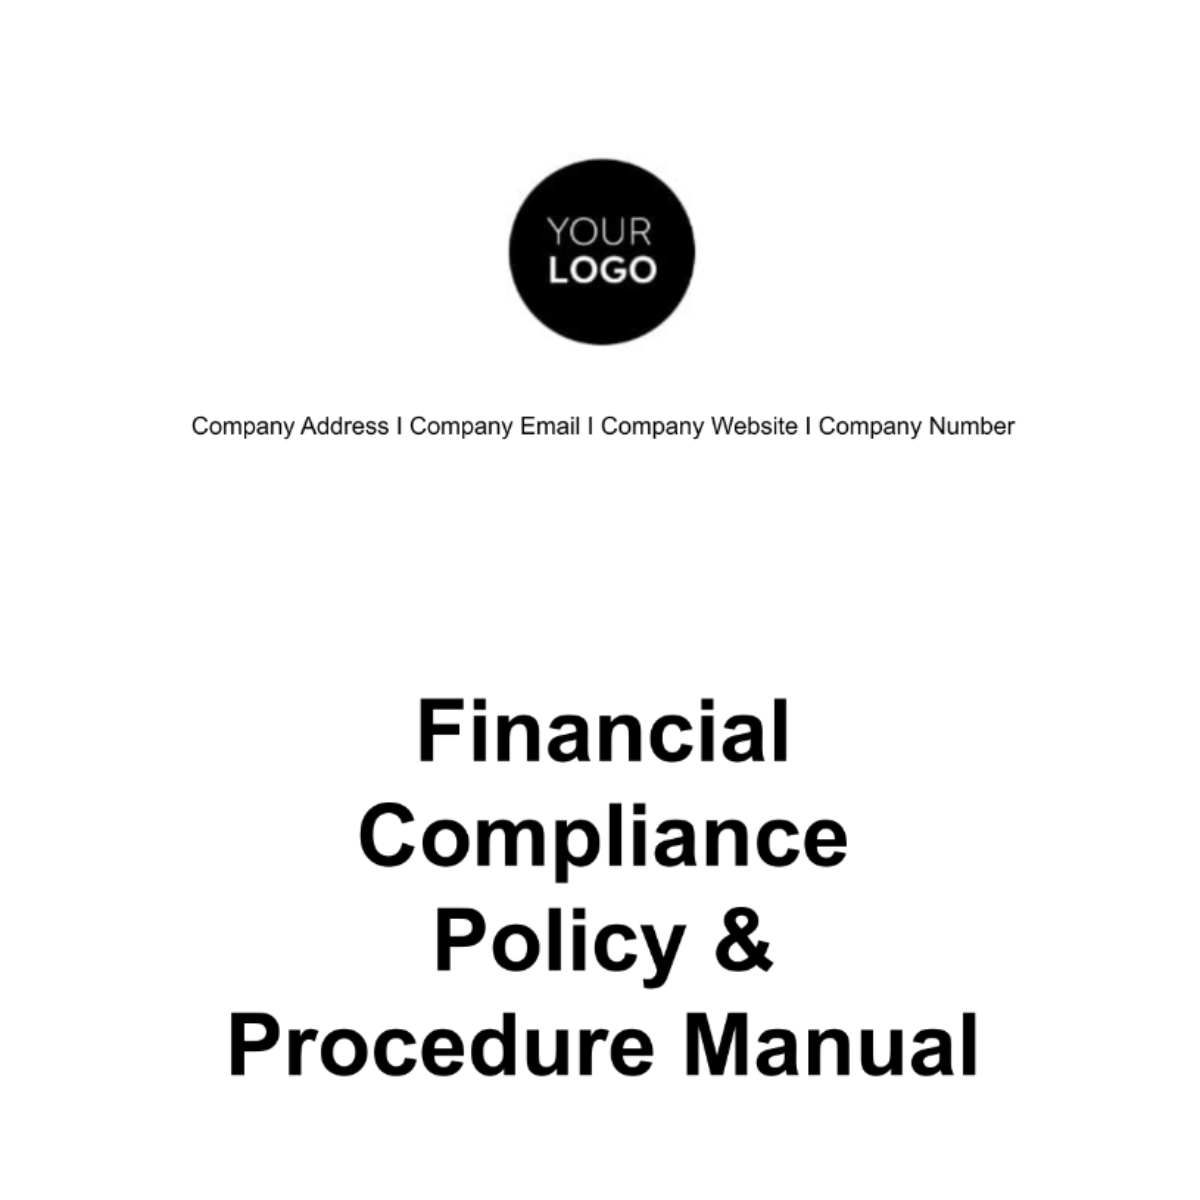 Free Financial Compliance Policy & Procedure Manual Template